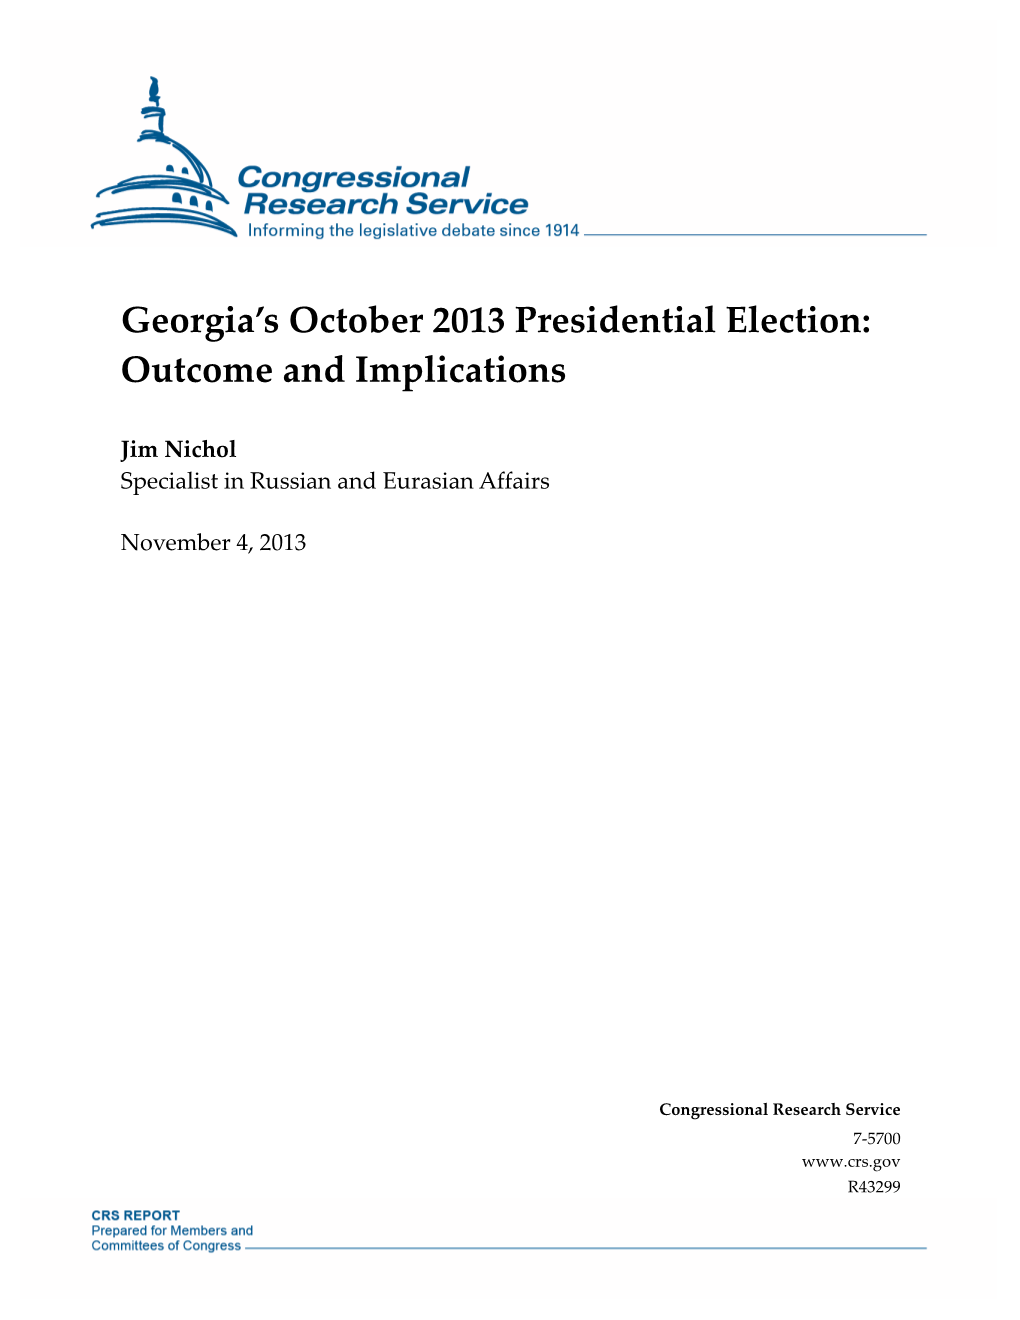 Georgia's October 2013 Presidential Election: Outcome and Implications